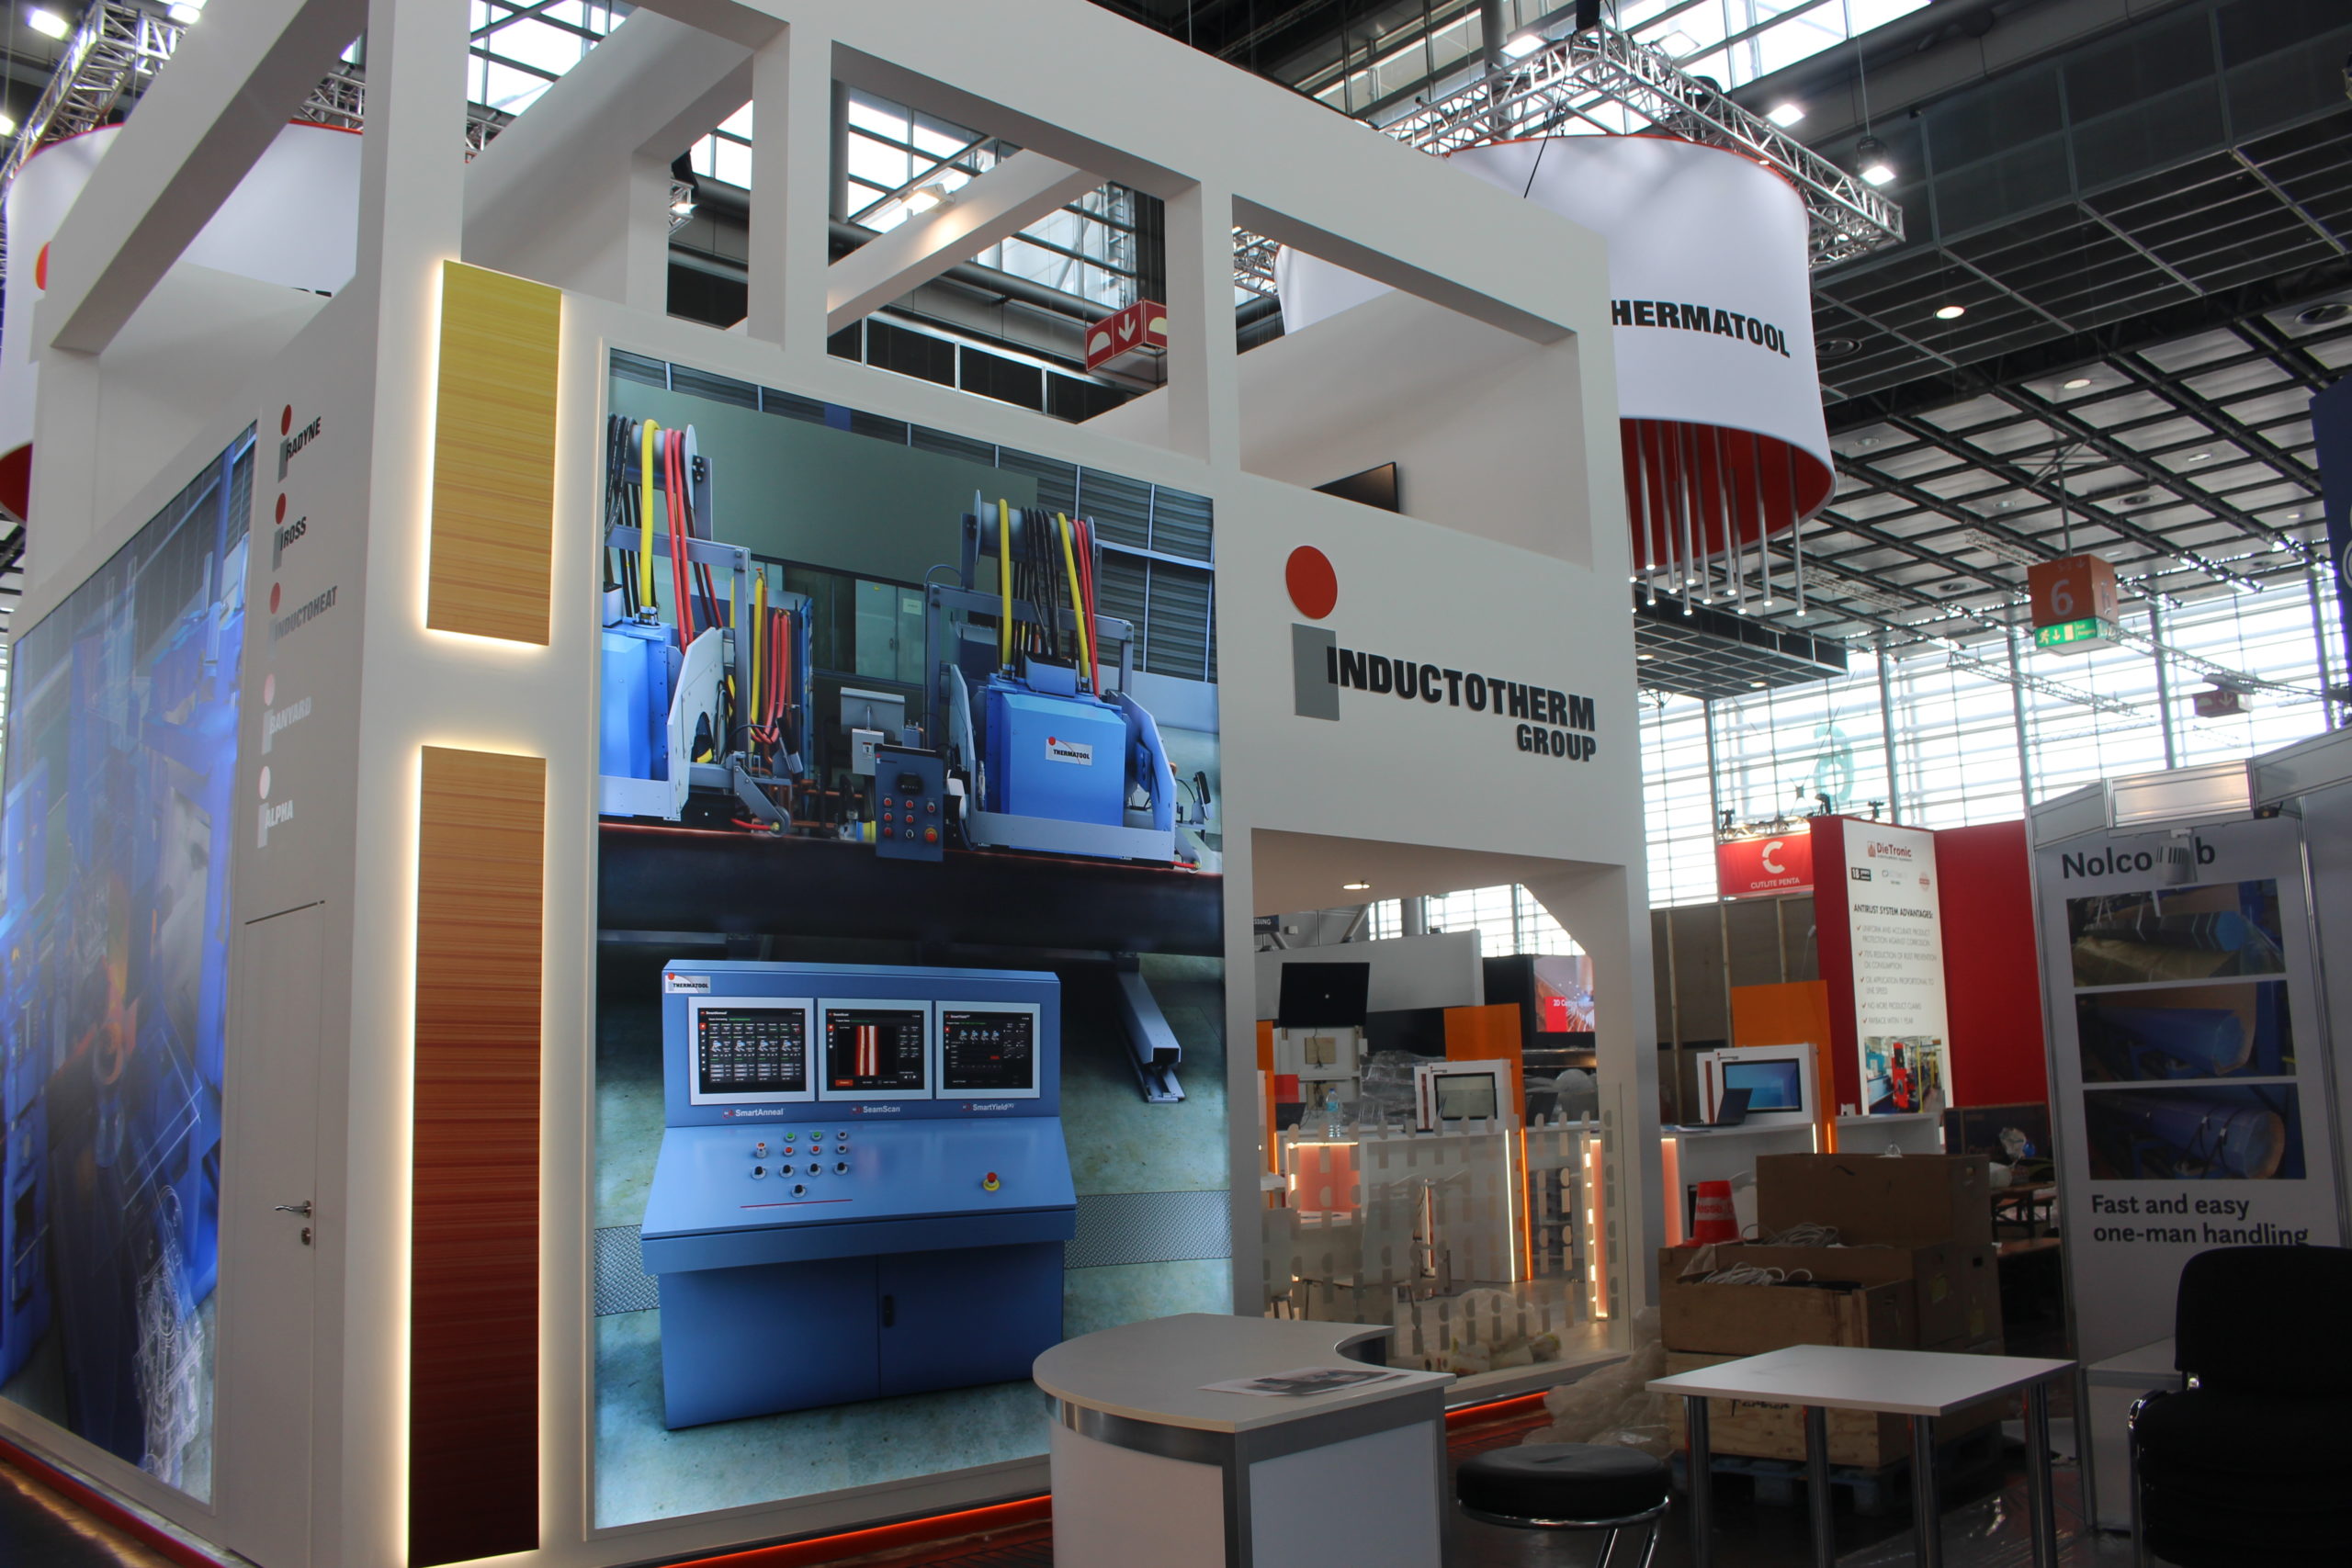 Inductotherm Group Stand at Tube 2022